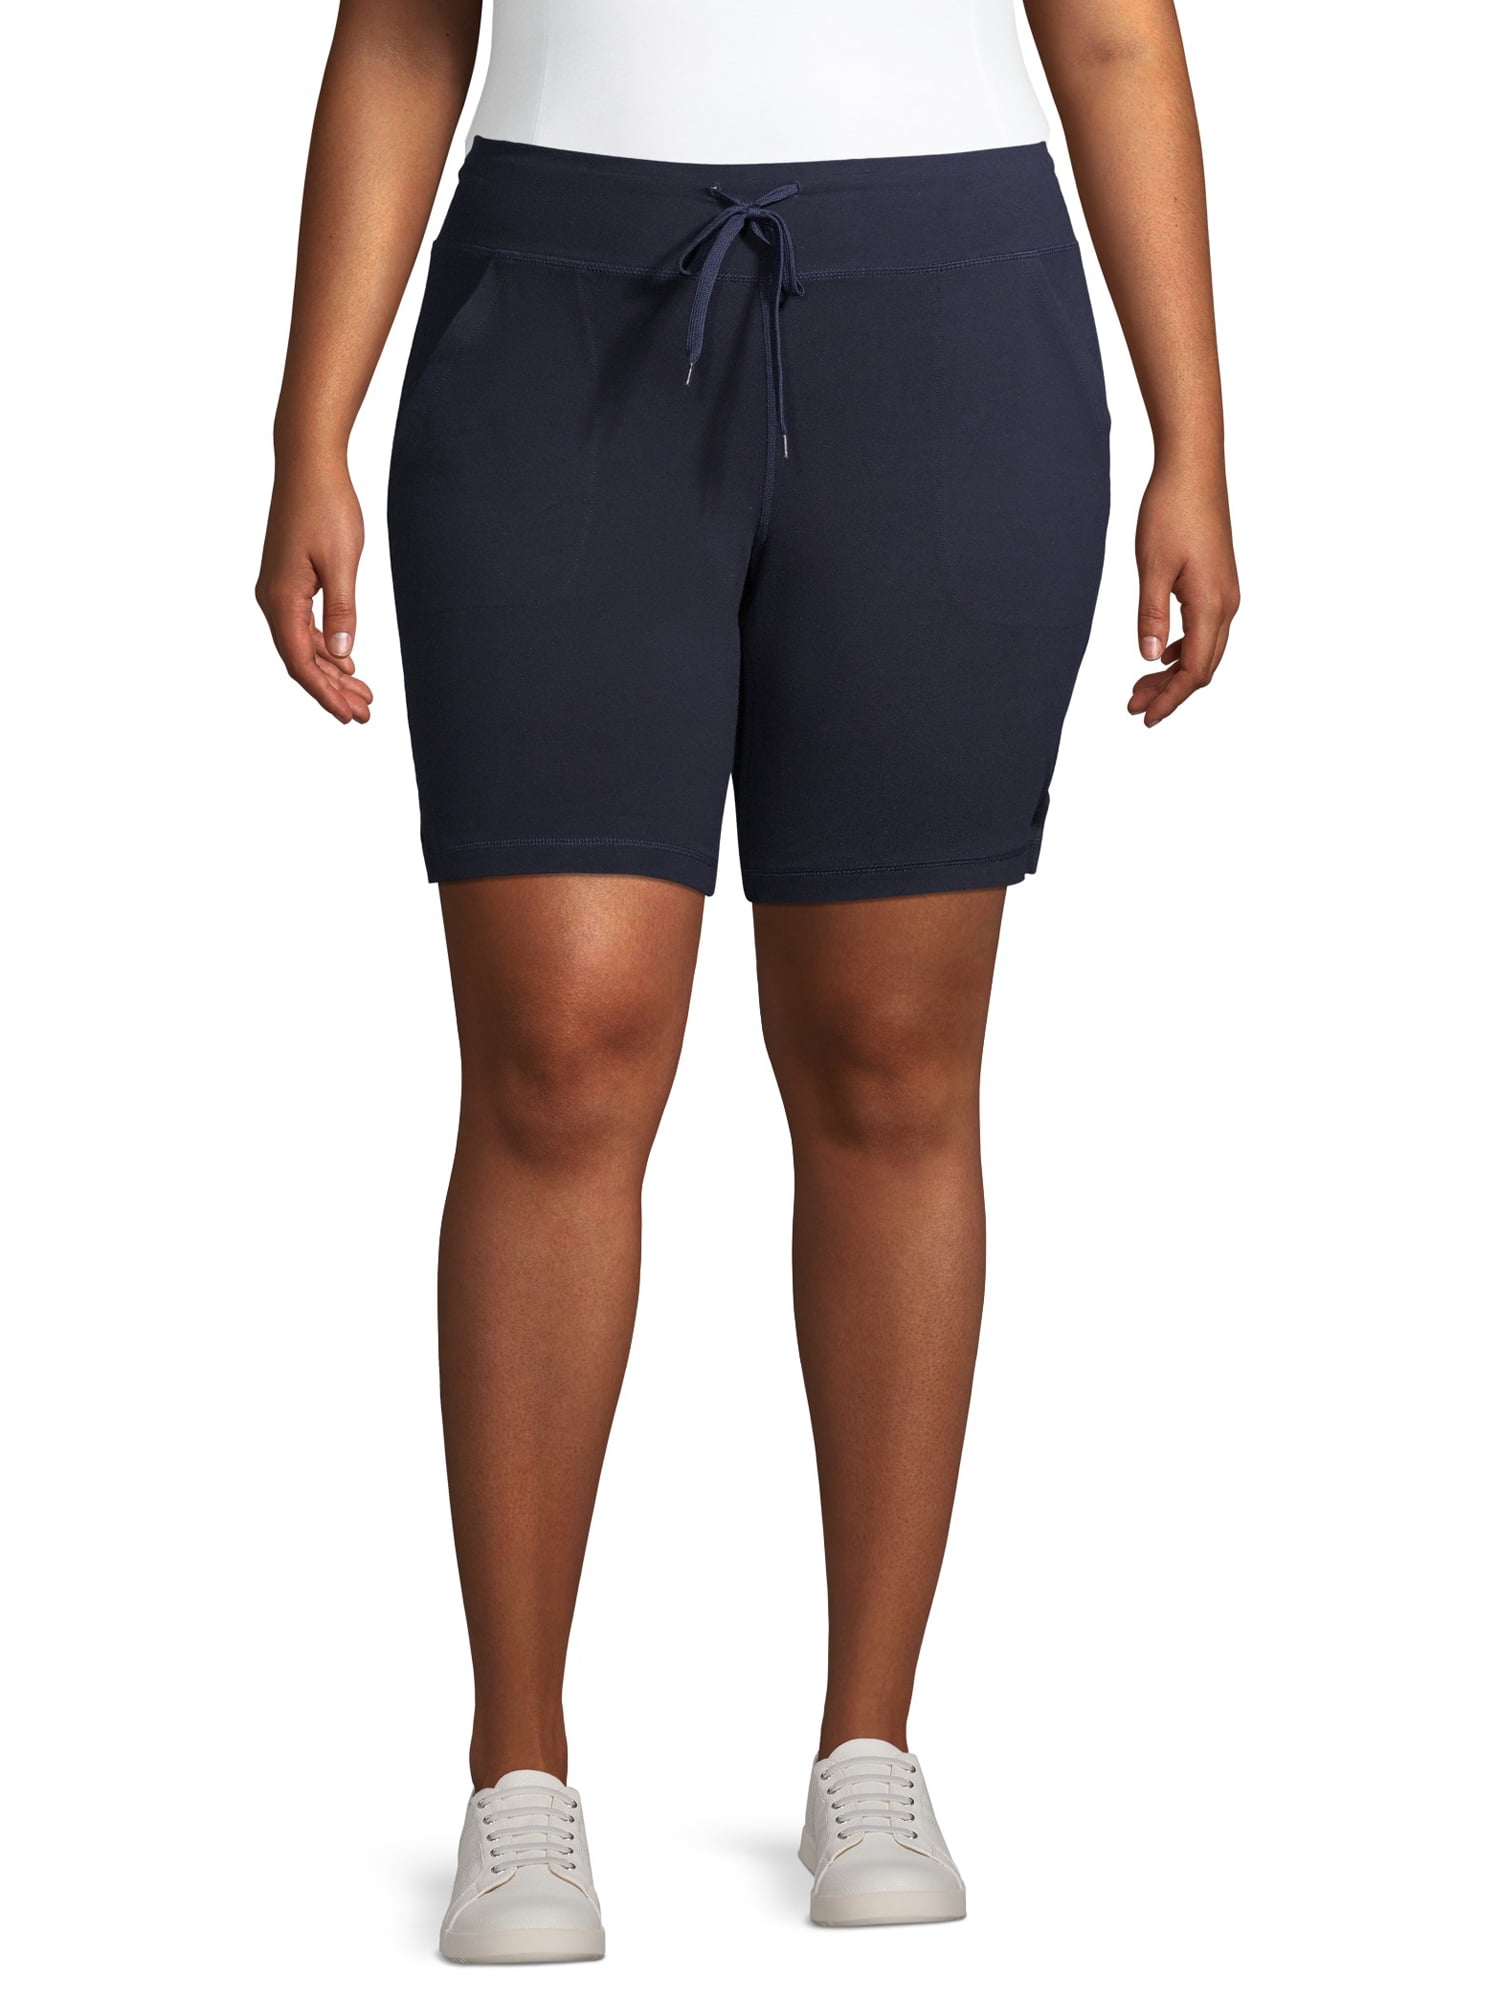 Athletic Works Womens's Plus Size 9 Bermuda short with Side vents